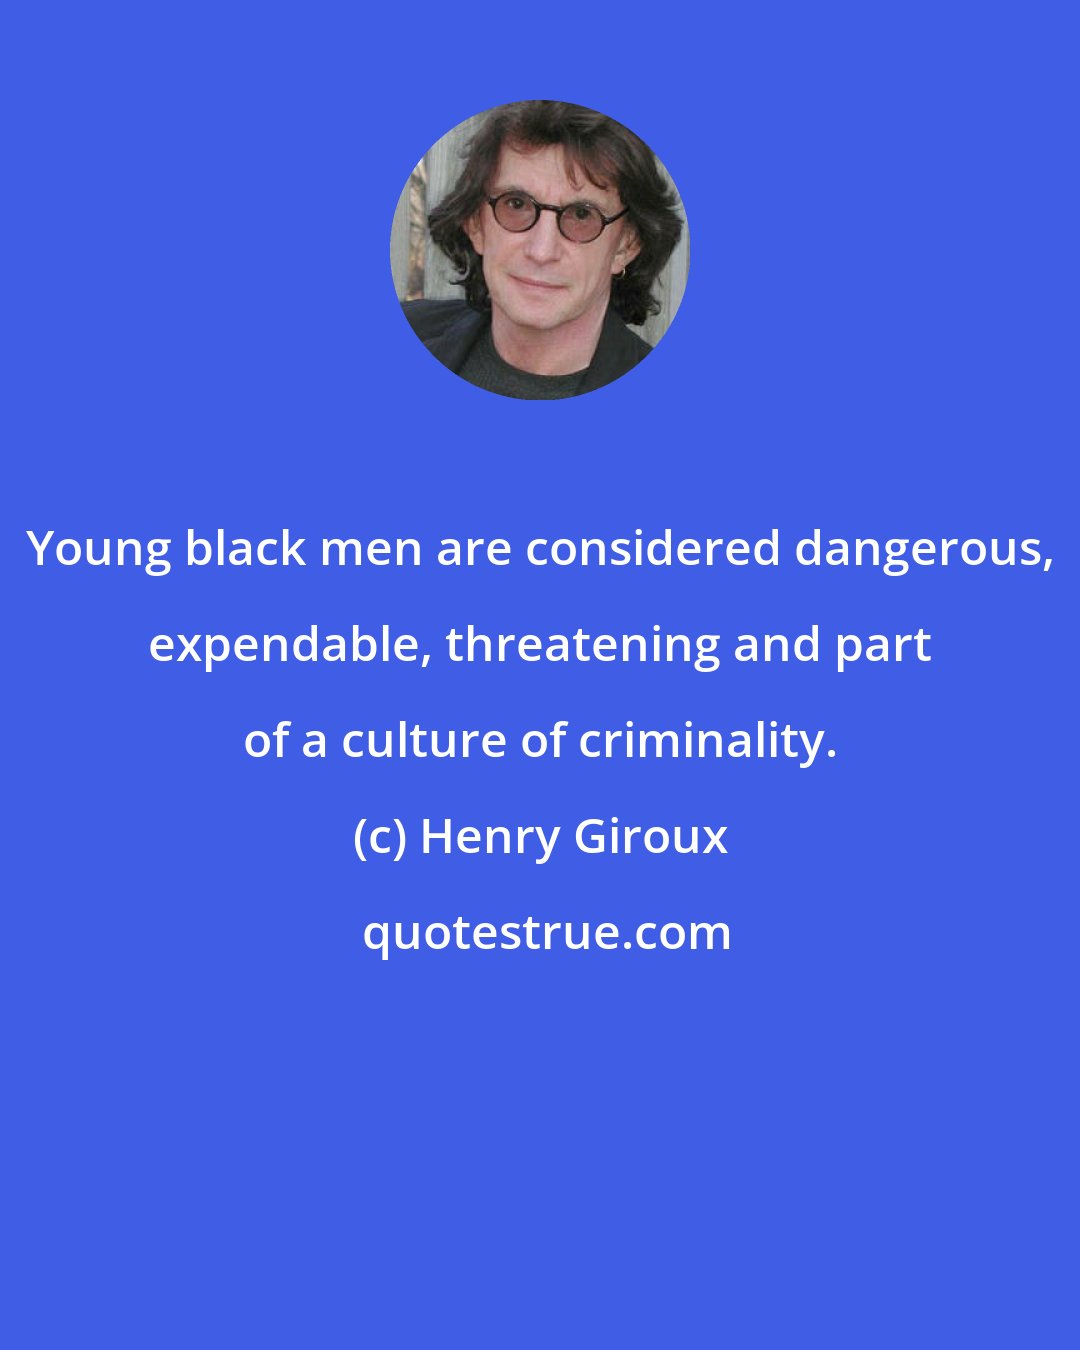 Henry Giroux: Young black men are considered dangerous, expendable, threatening and part of a culture of criminality.